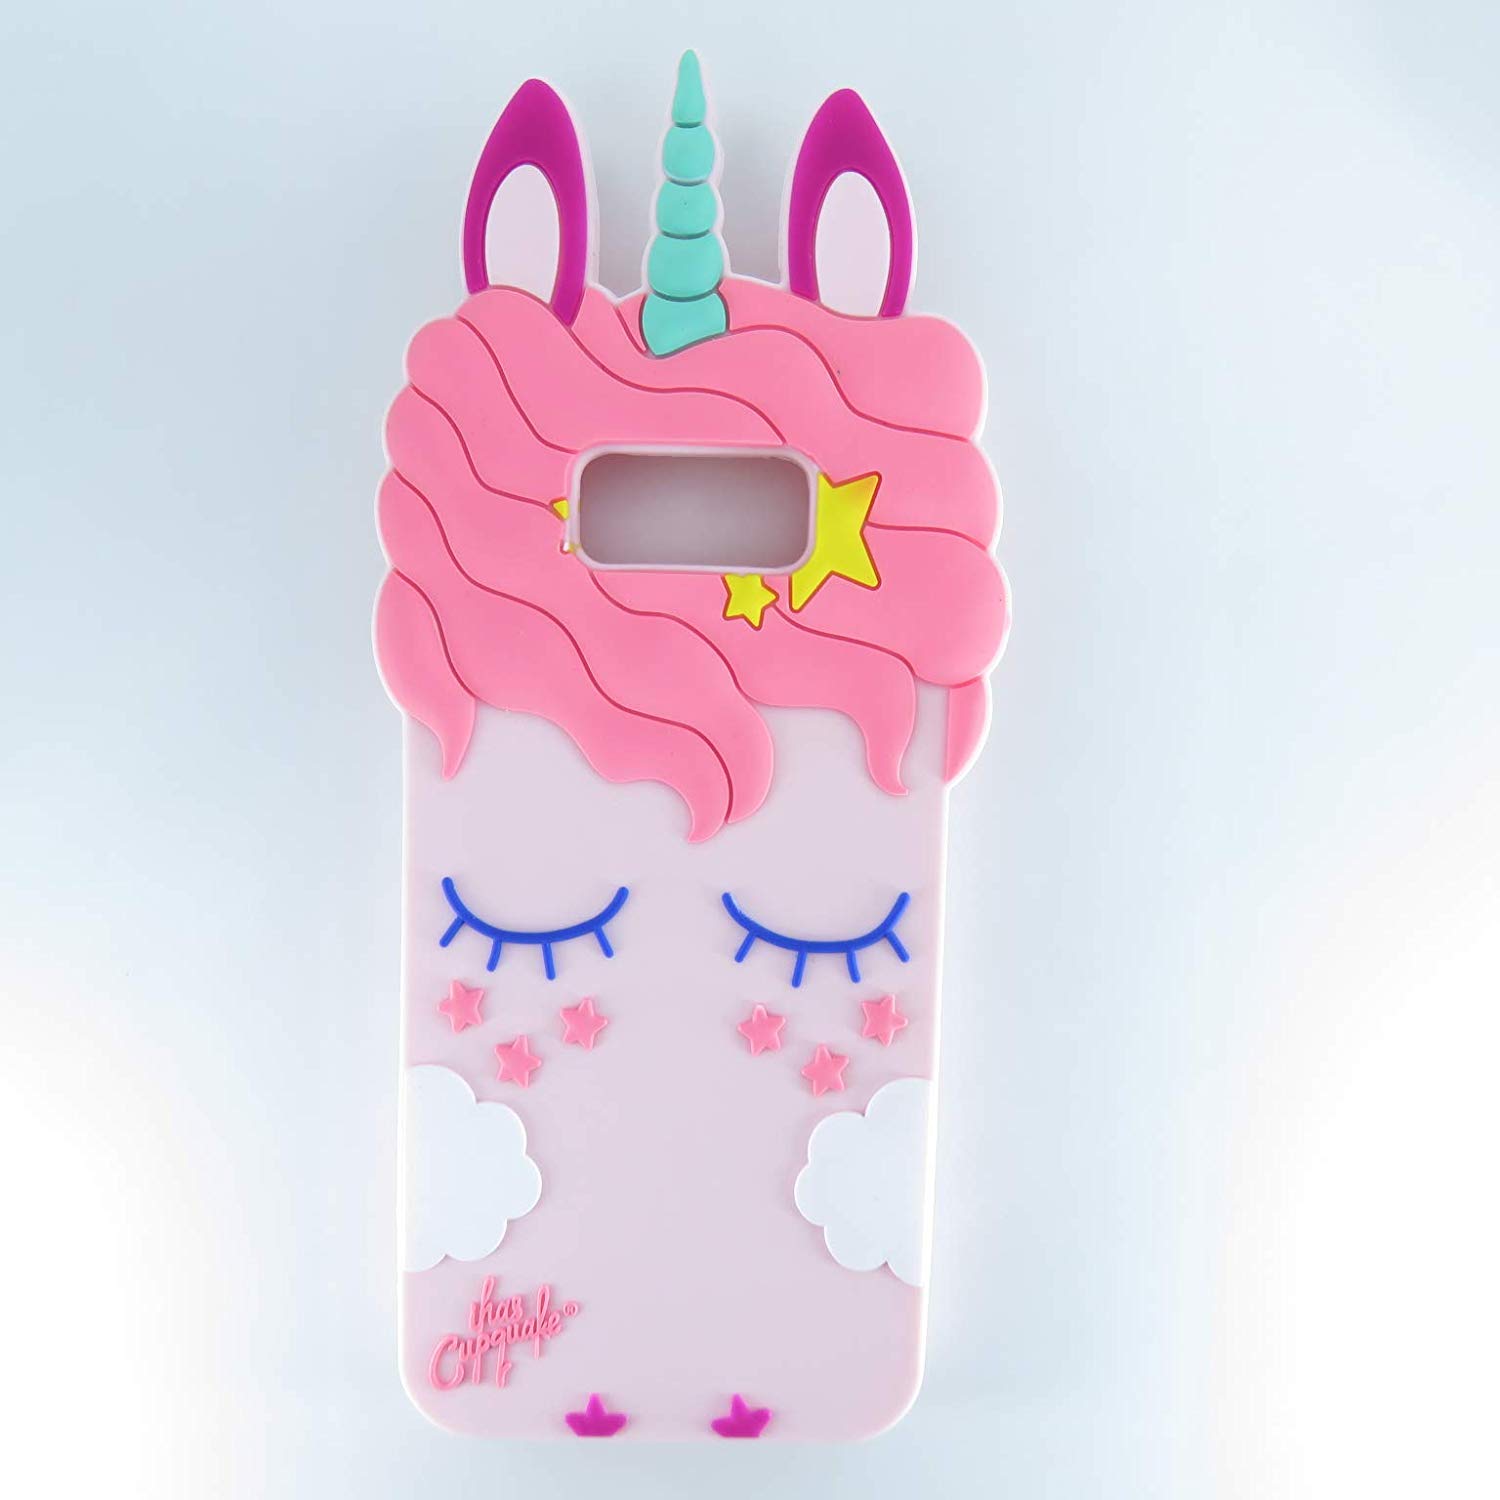 Cartoon Soft Phone Cases For Samsung, Samsung Galaxy, and NOTE